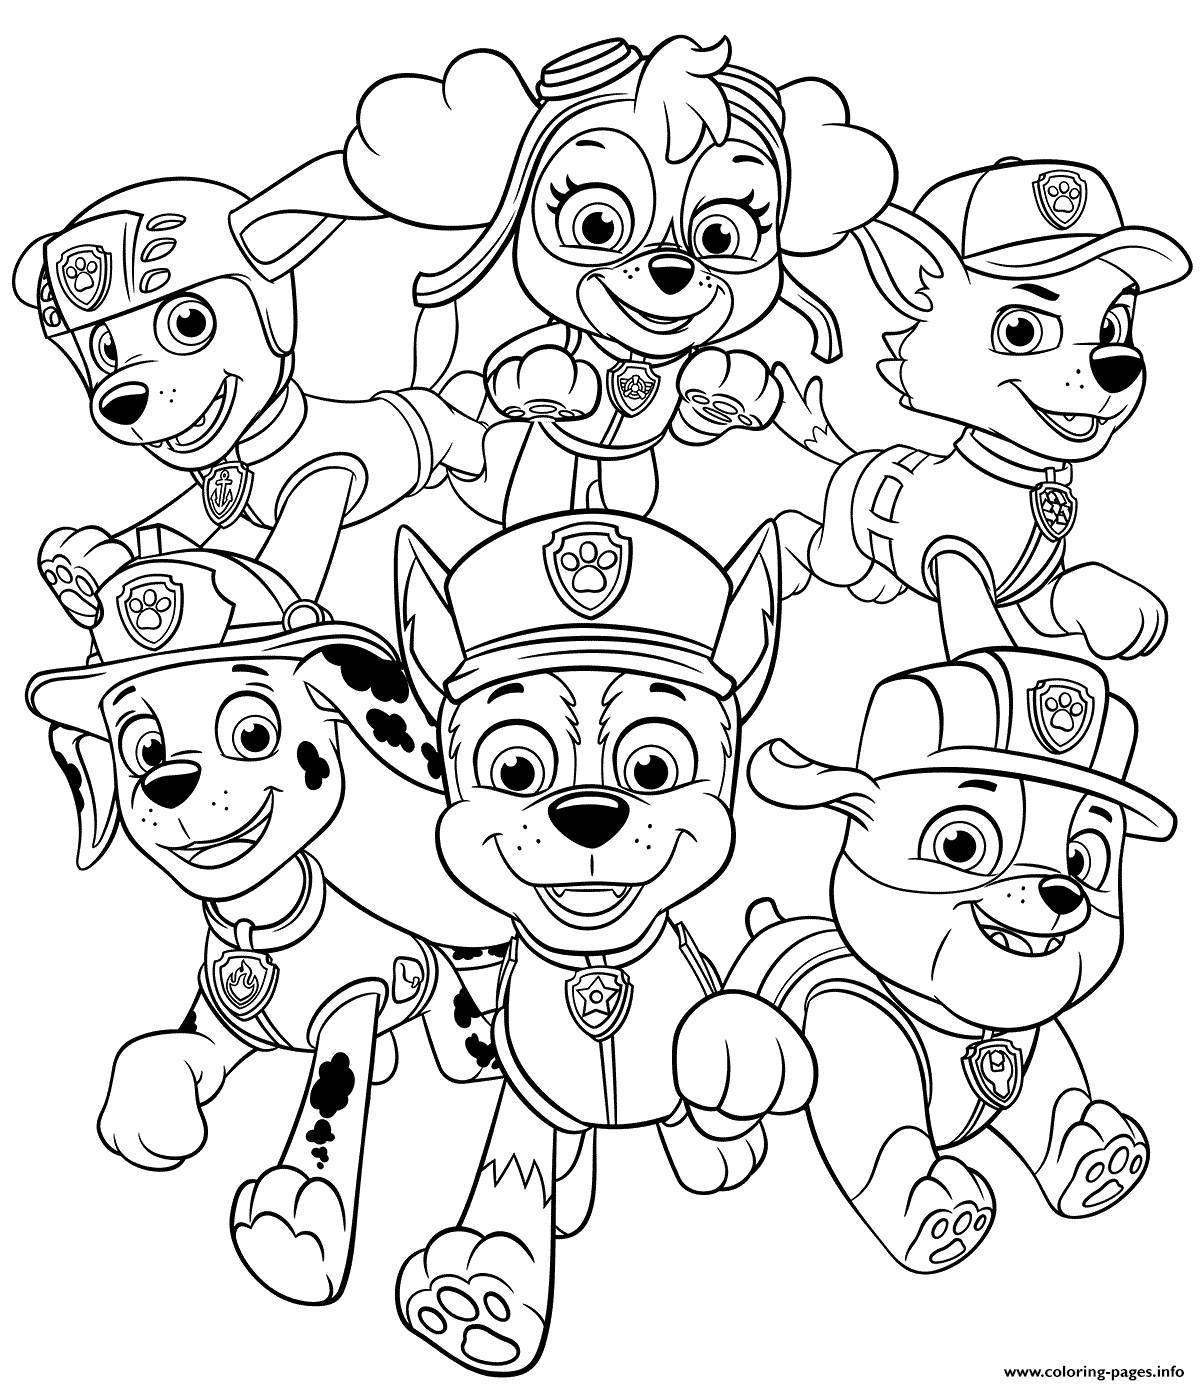 Paw patrol for 3 4 year olds #2